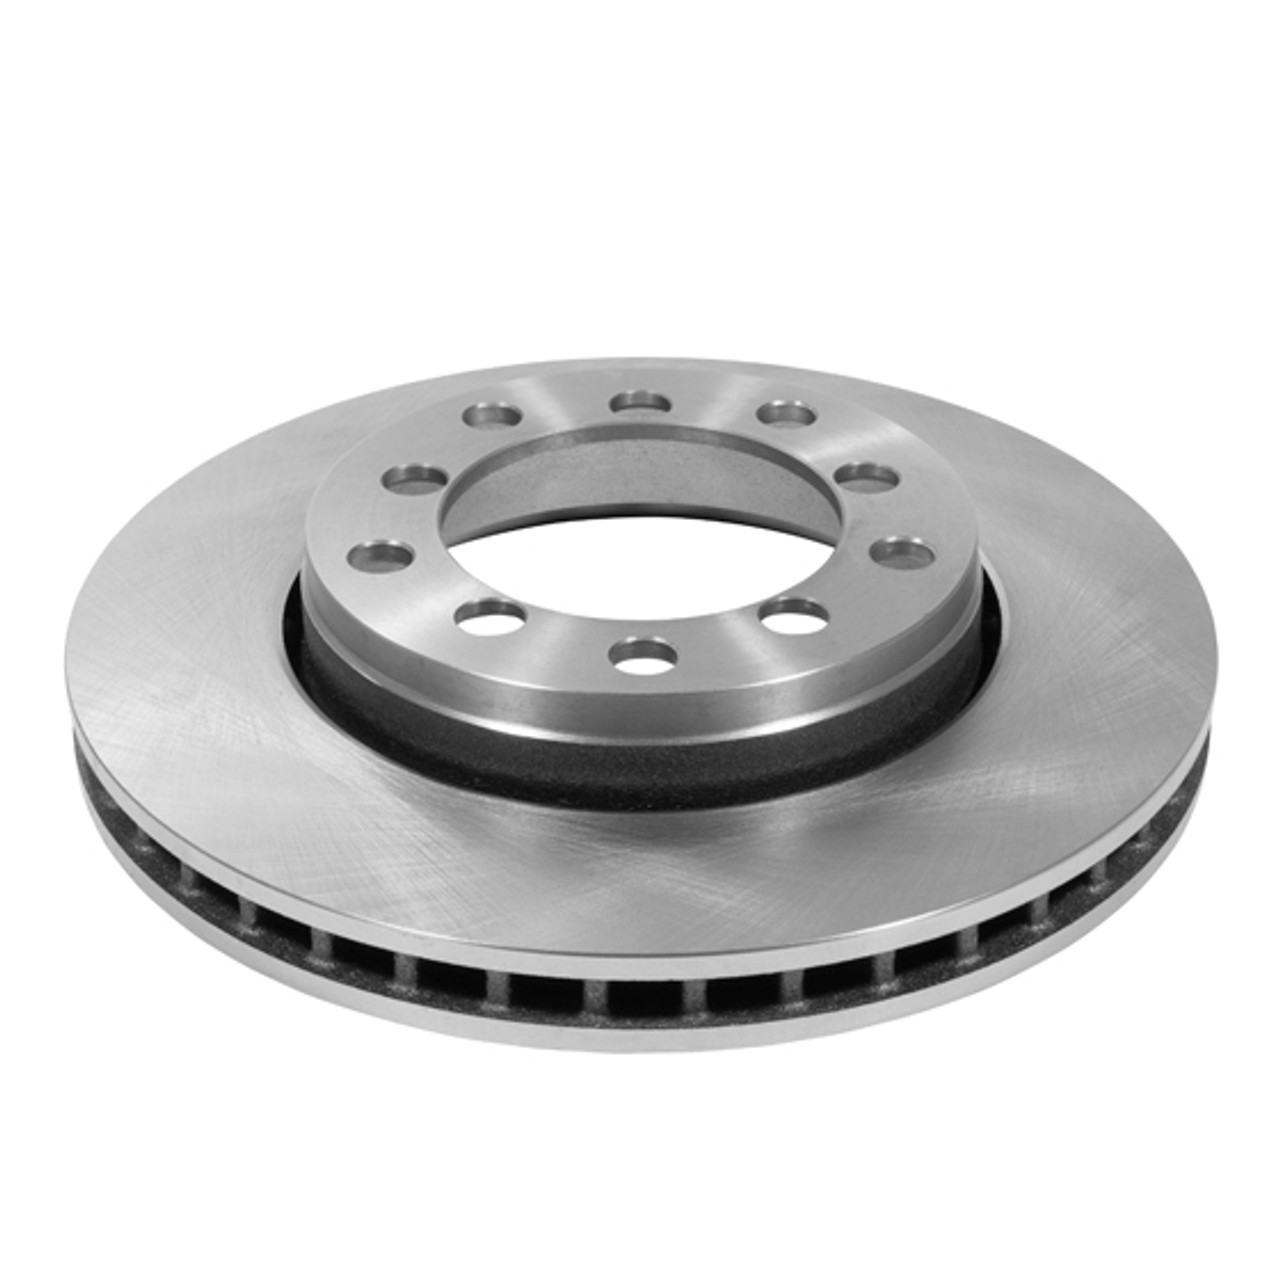 Yukon Front Double Drilled Brake Rotor for Jeep Wrangler 5 x 5.5" Spin-Free Kit